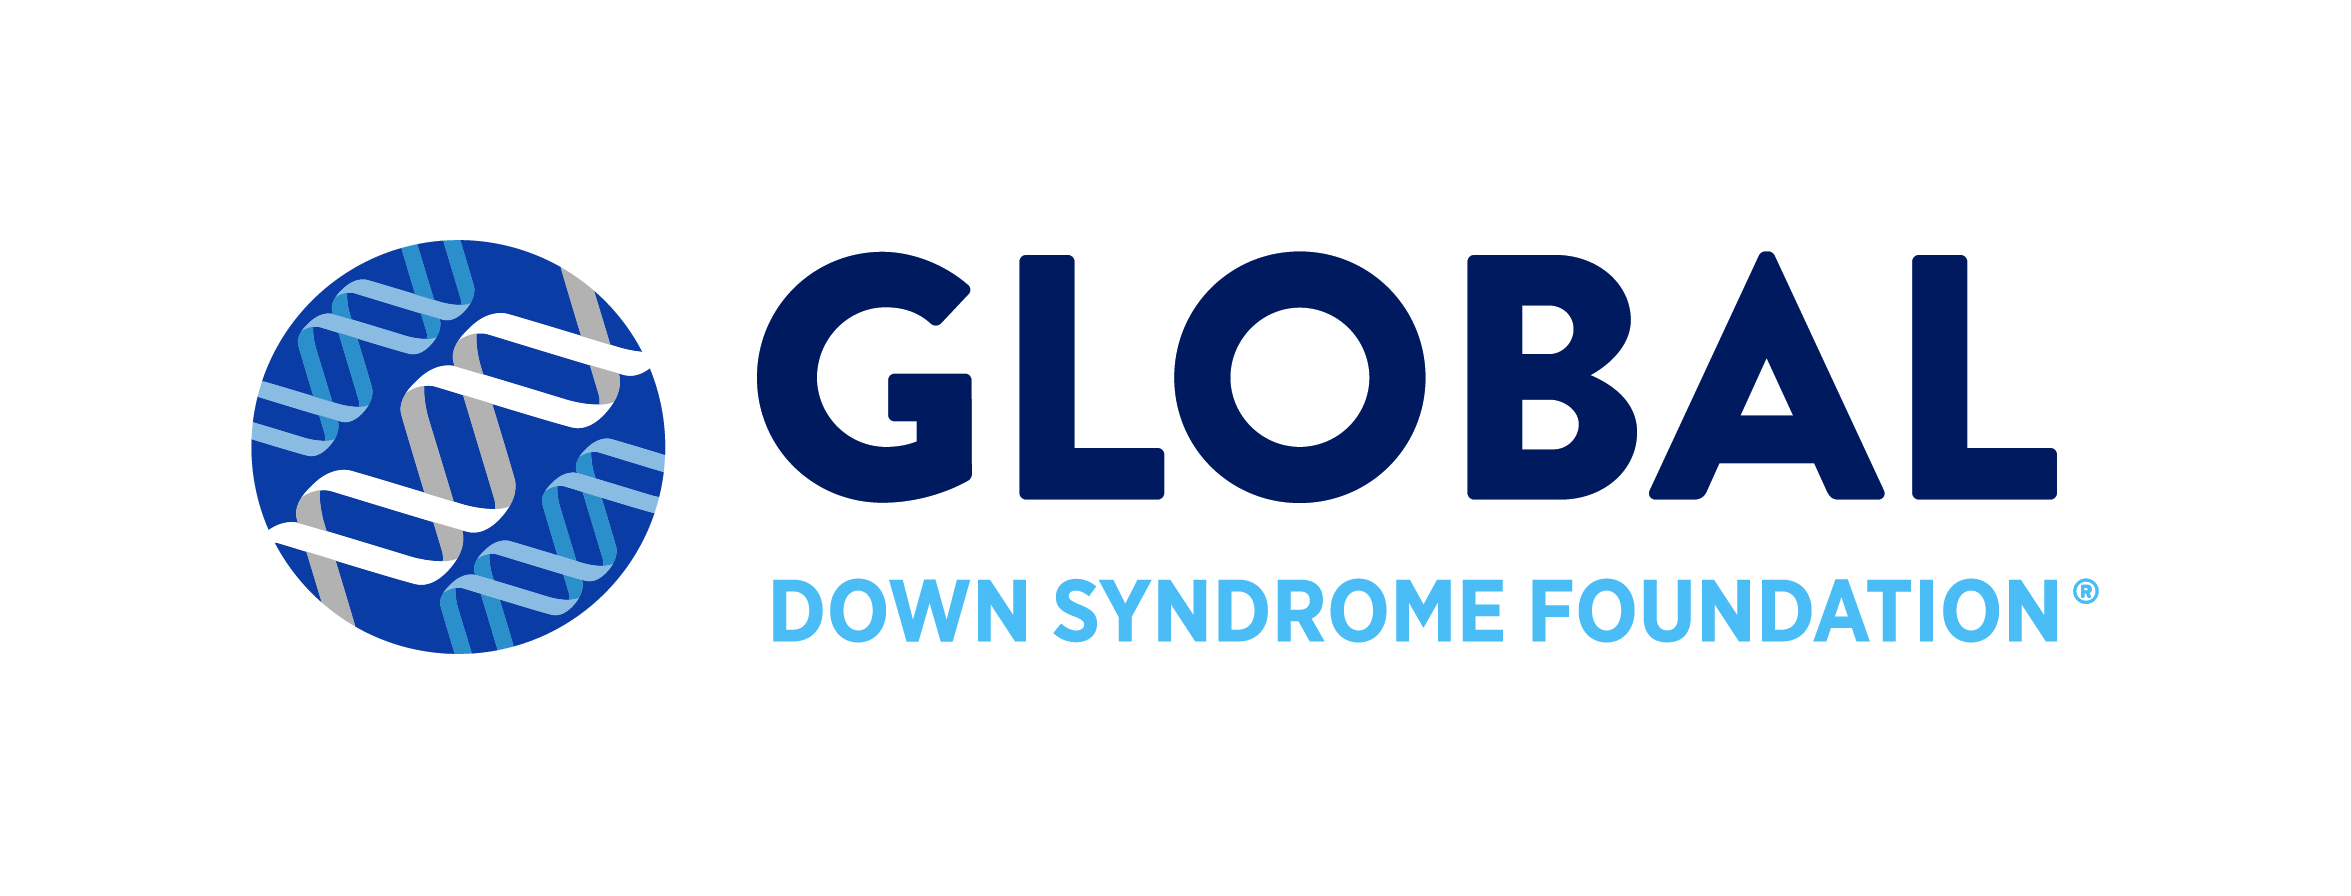 Global Down Syndrome Foundation Applauds House Energy & Commerce Committee for Advancing Legislation to Authorize Down Syndrome Research Program at NIH